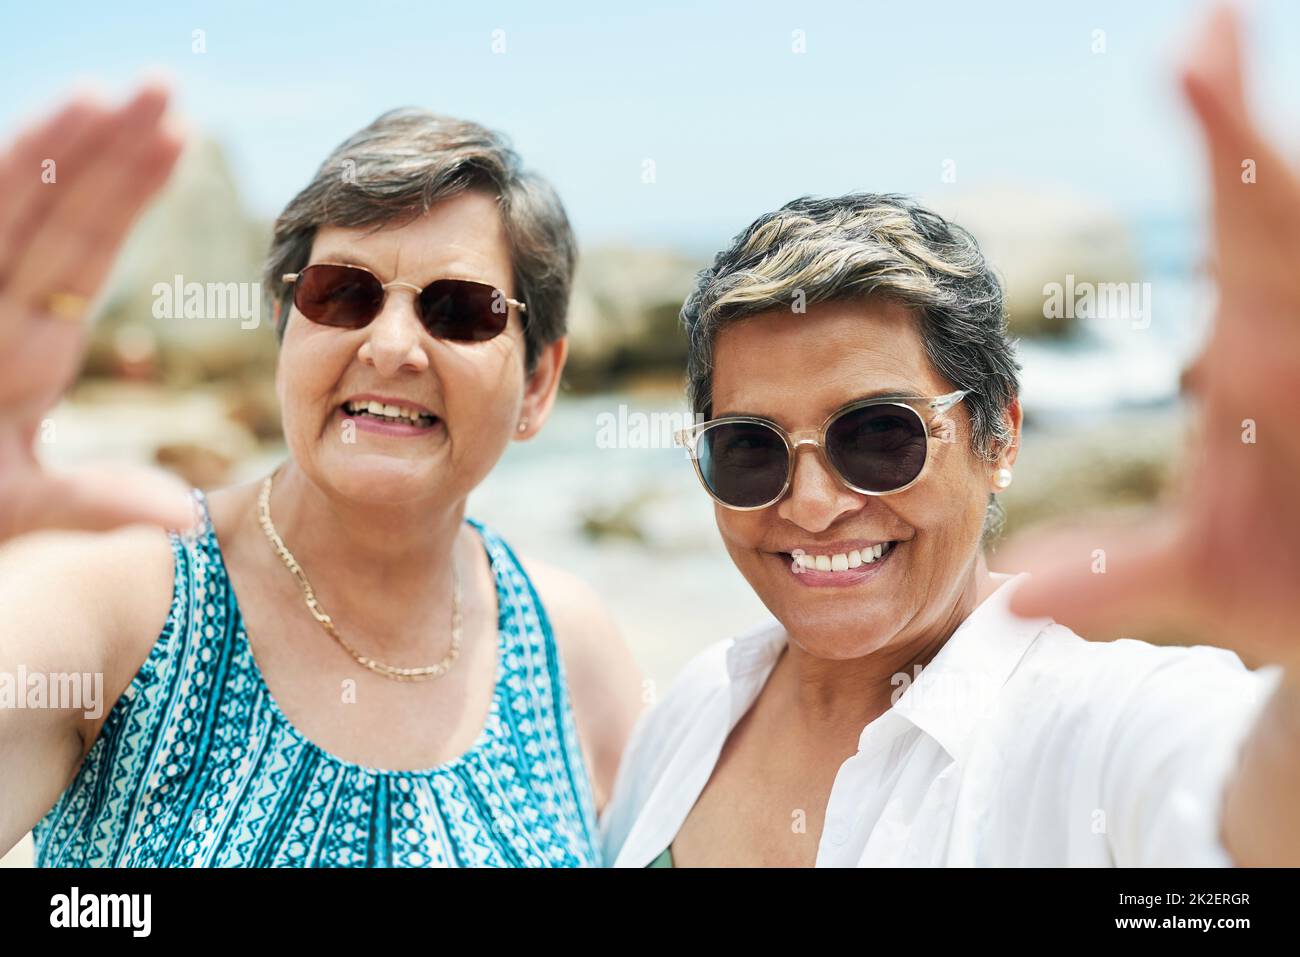 How can we not a selfie on the beach. Shot of two mature friends standing together and posing for a selfie during a day out on the beach. Stock Photo